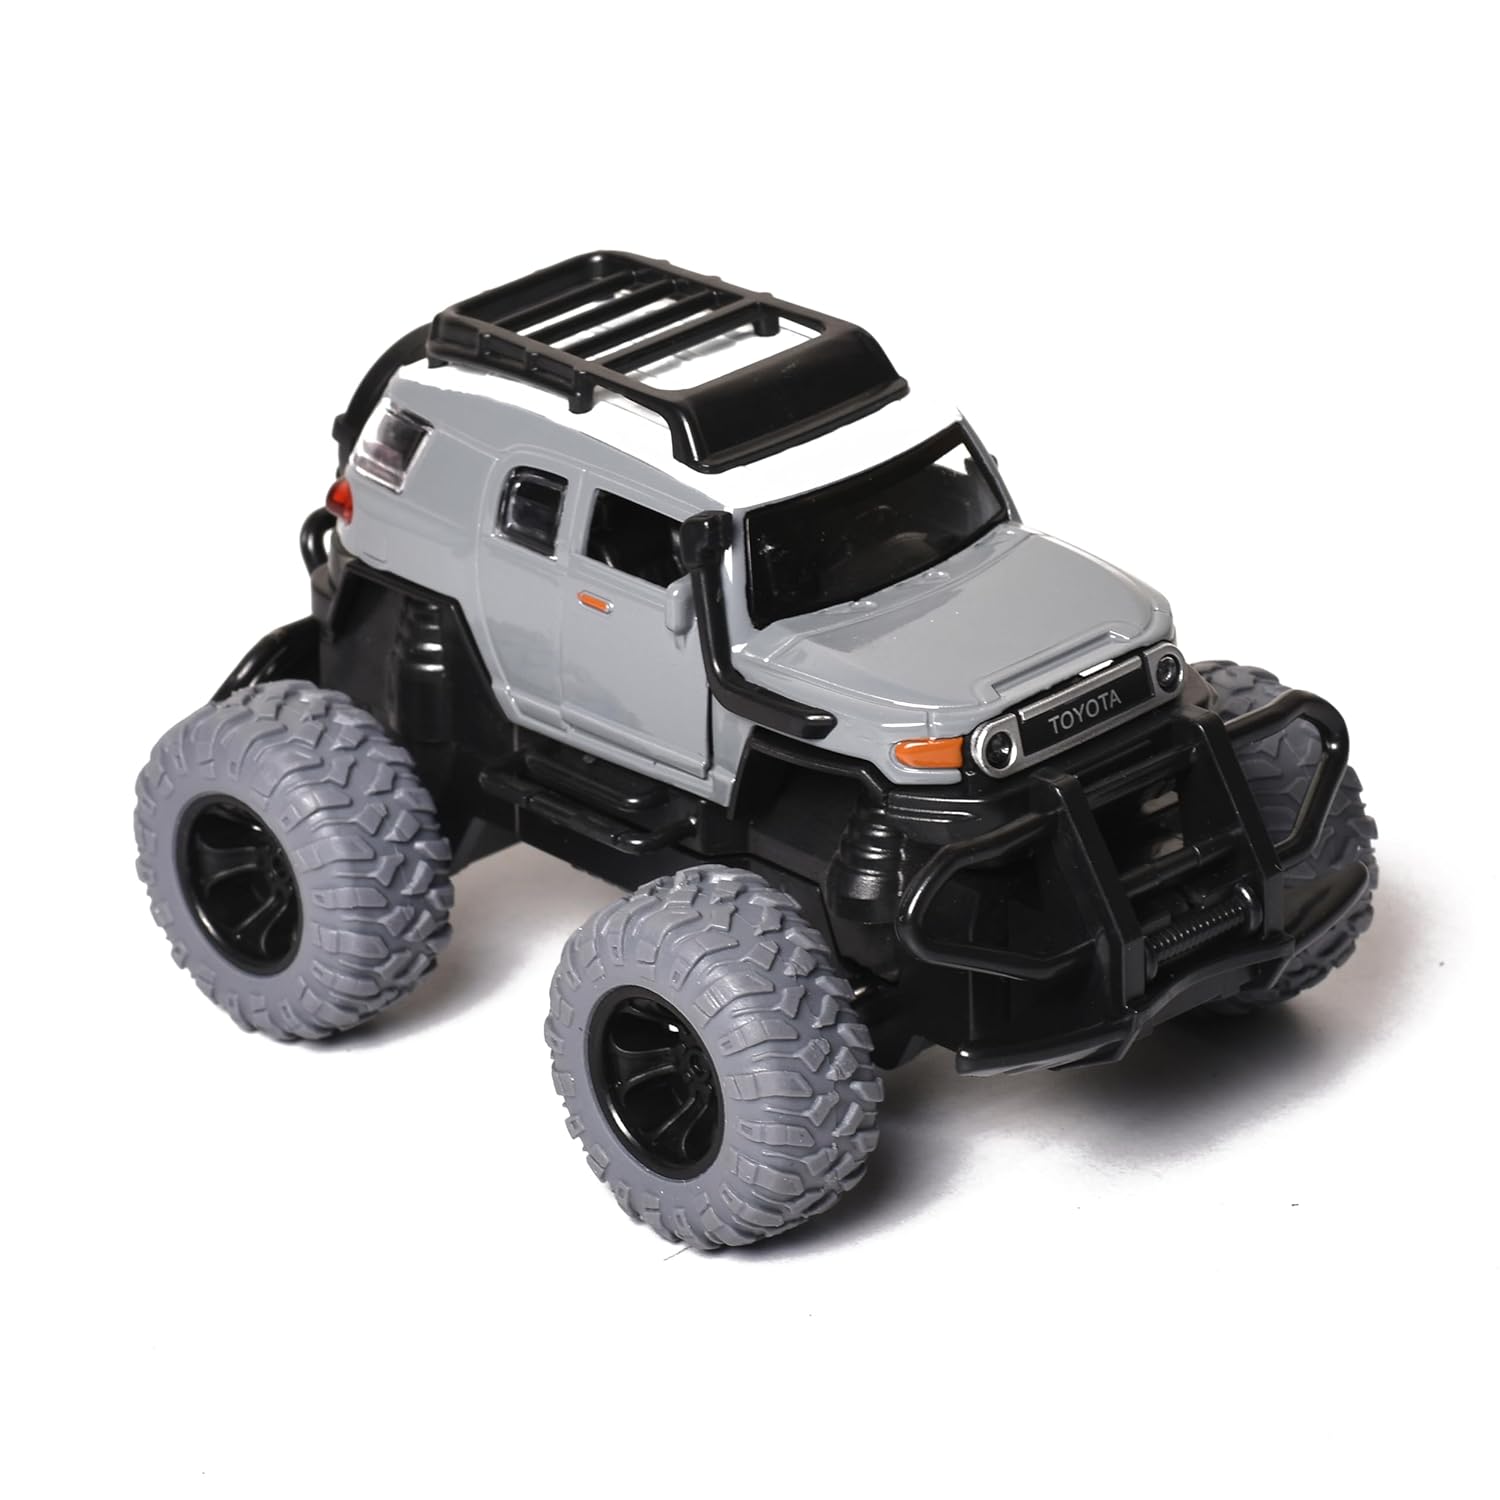 Braintastic Simulation Alloy Metal Pull Back Diecast Car 1:32 Off Road Model Pull Back Car with Sound & Light Toys for Kids Age 3+ Years Grey